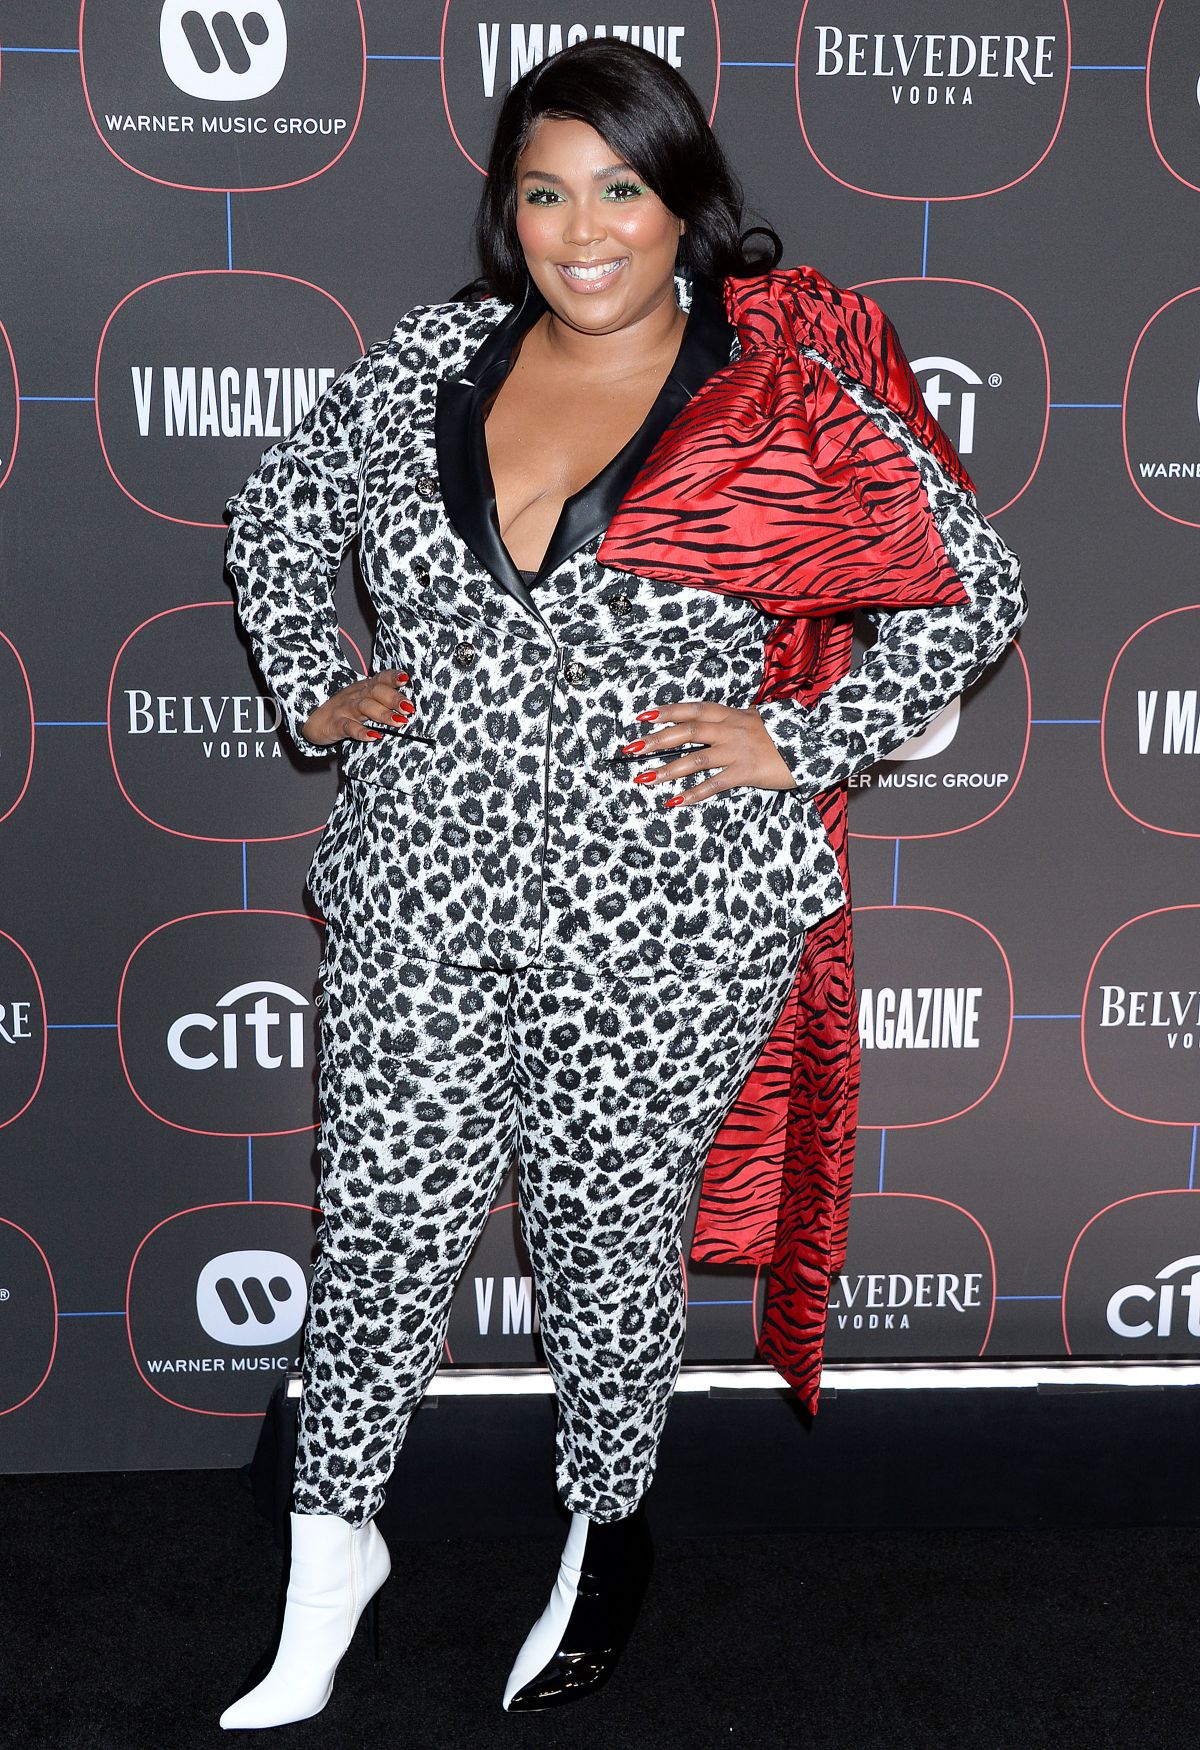 lizzo-at-warner-music-s-pre-grammys-party-in-los-angeles-02-07-2019-3.jpg